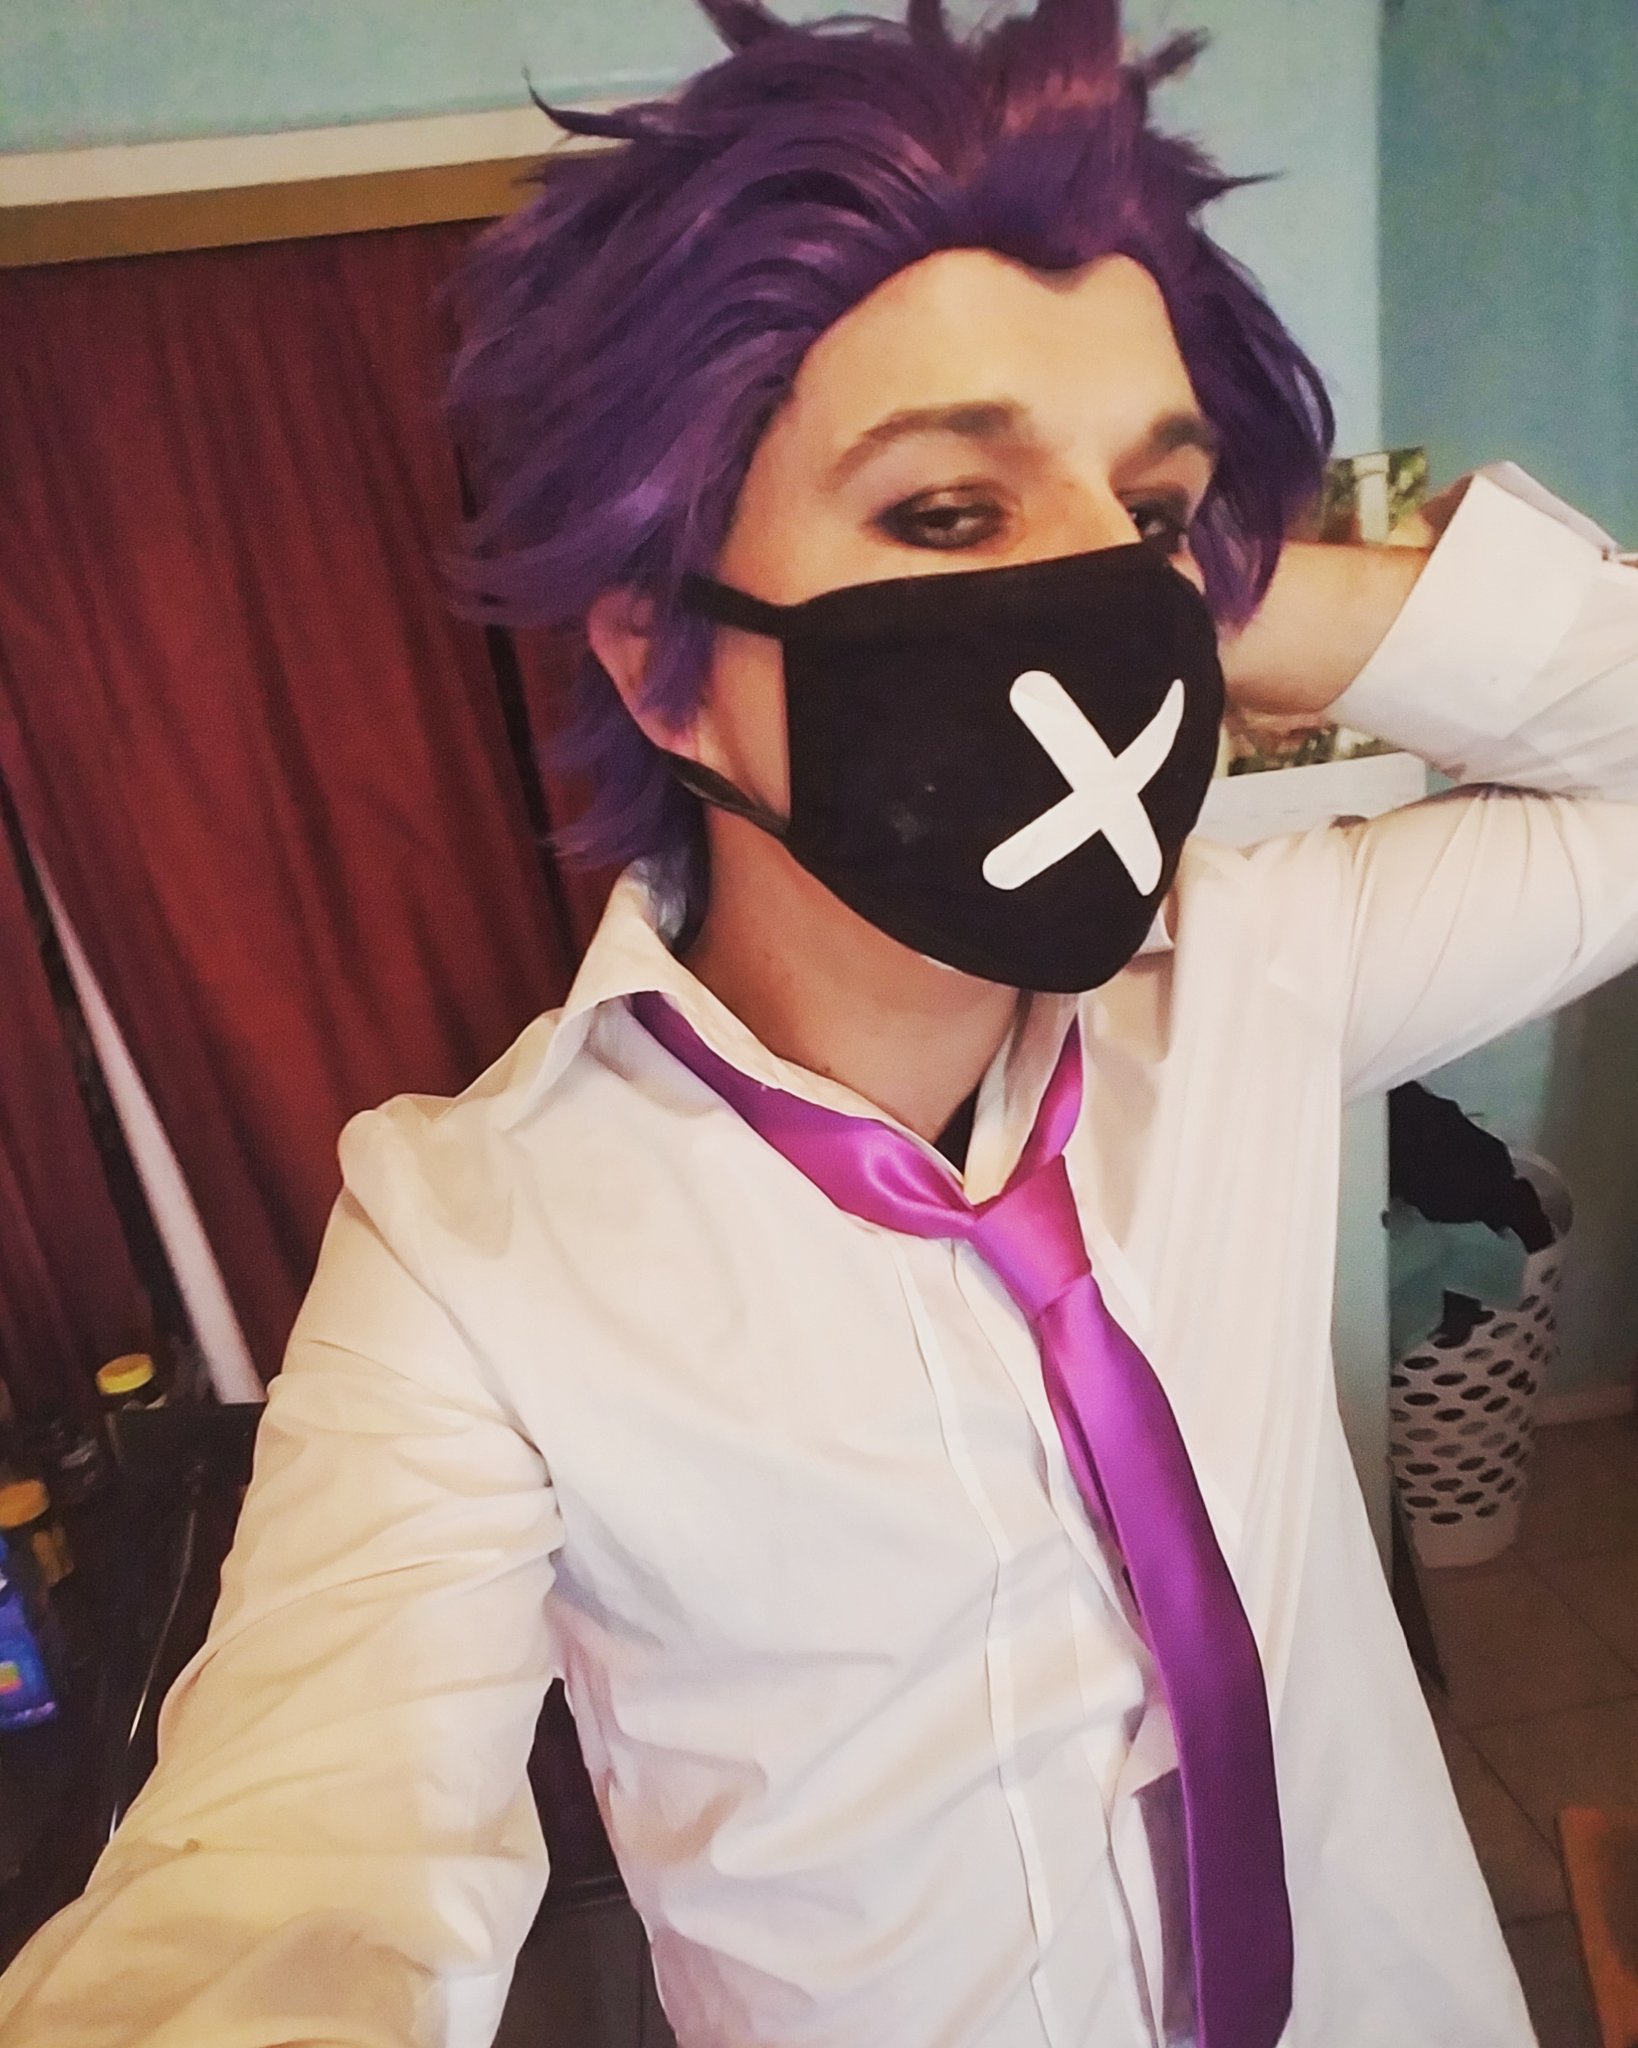 Now, talk to me and tell me your dark desire. #shinsocosplay  #shinsouhitoshi #shinsoucosplay #shinsouxmonoma #shinsouhitoshicosplay…